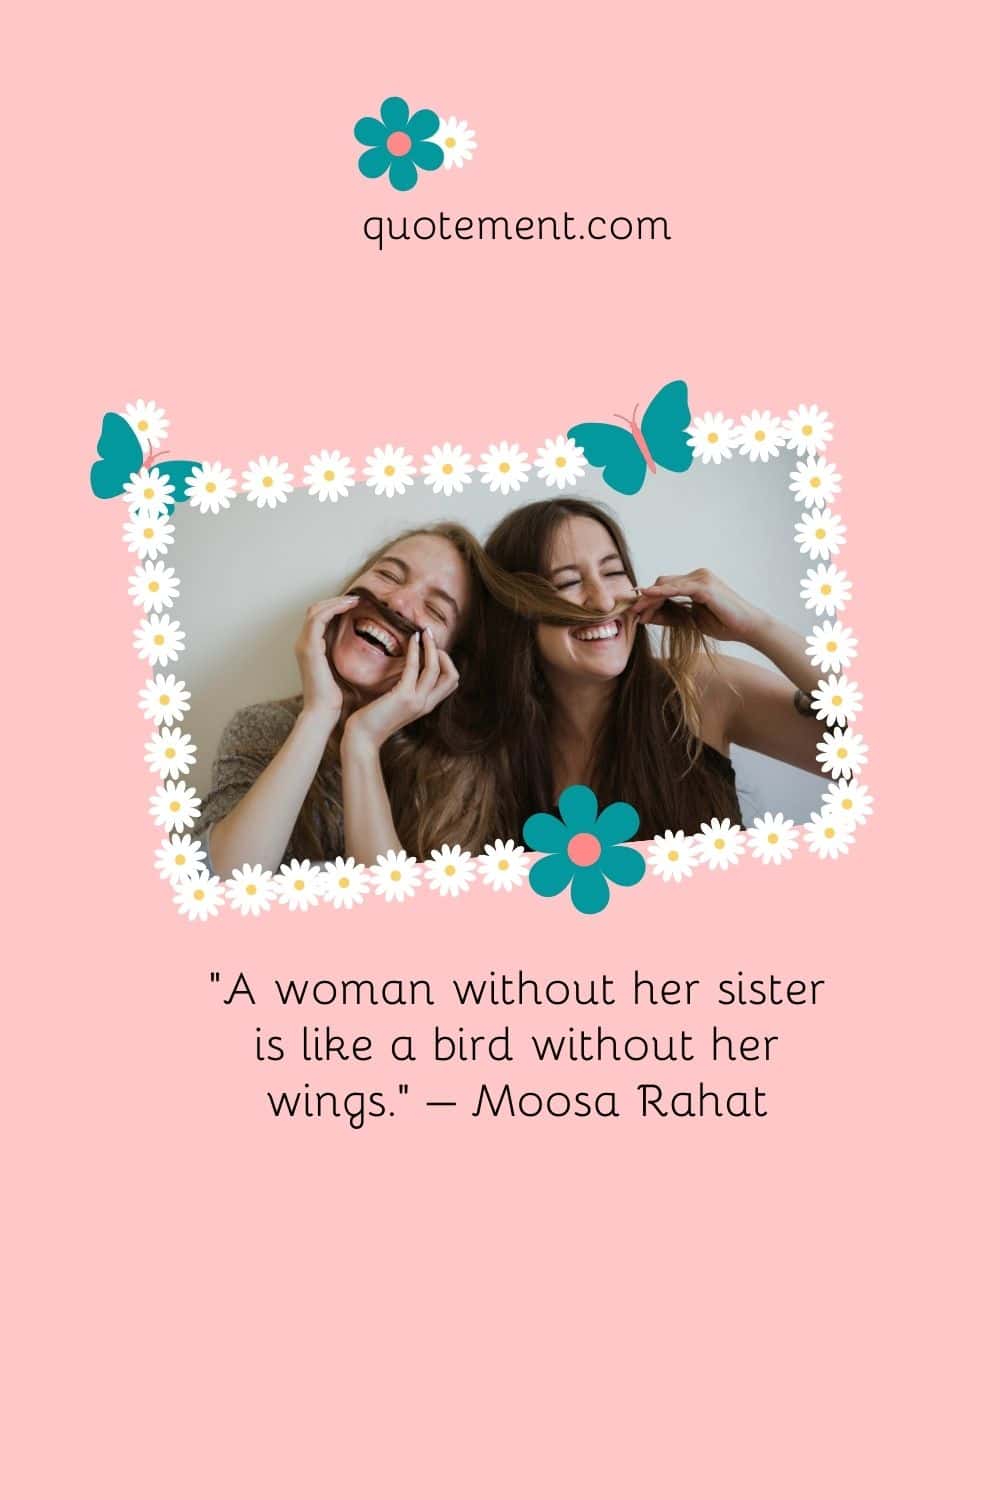 “A woman without her sister is like a bird without her wings.” – Moosa Rahat